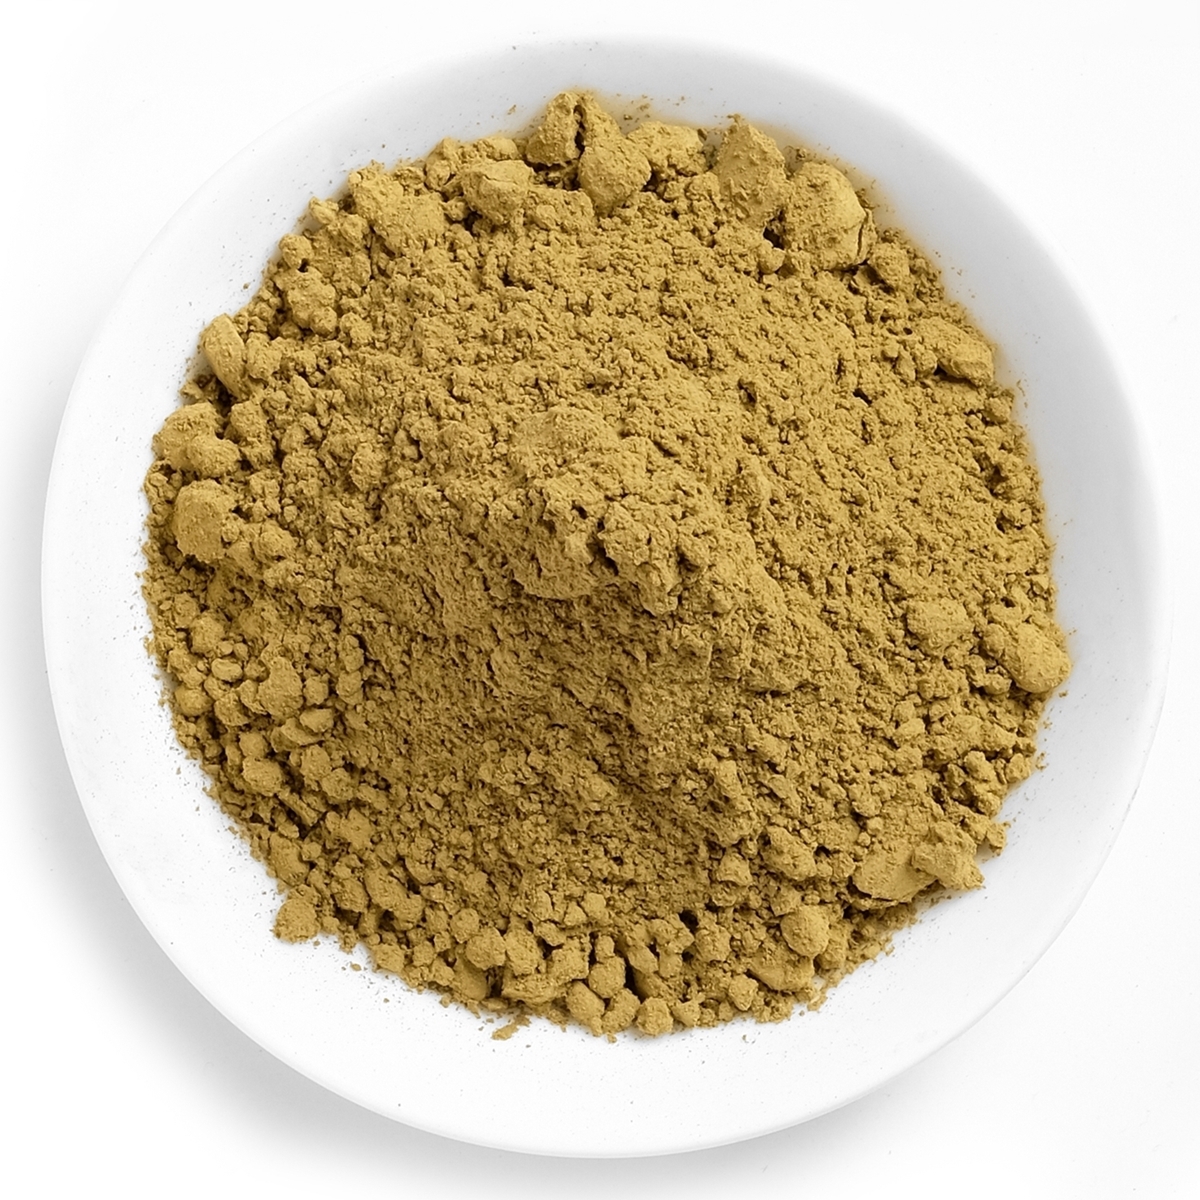 Red thai kratom extract powder in a white dish